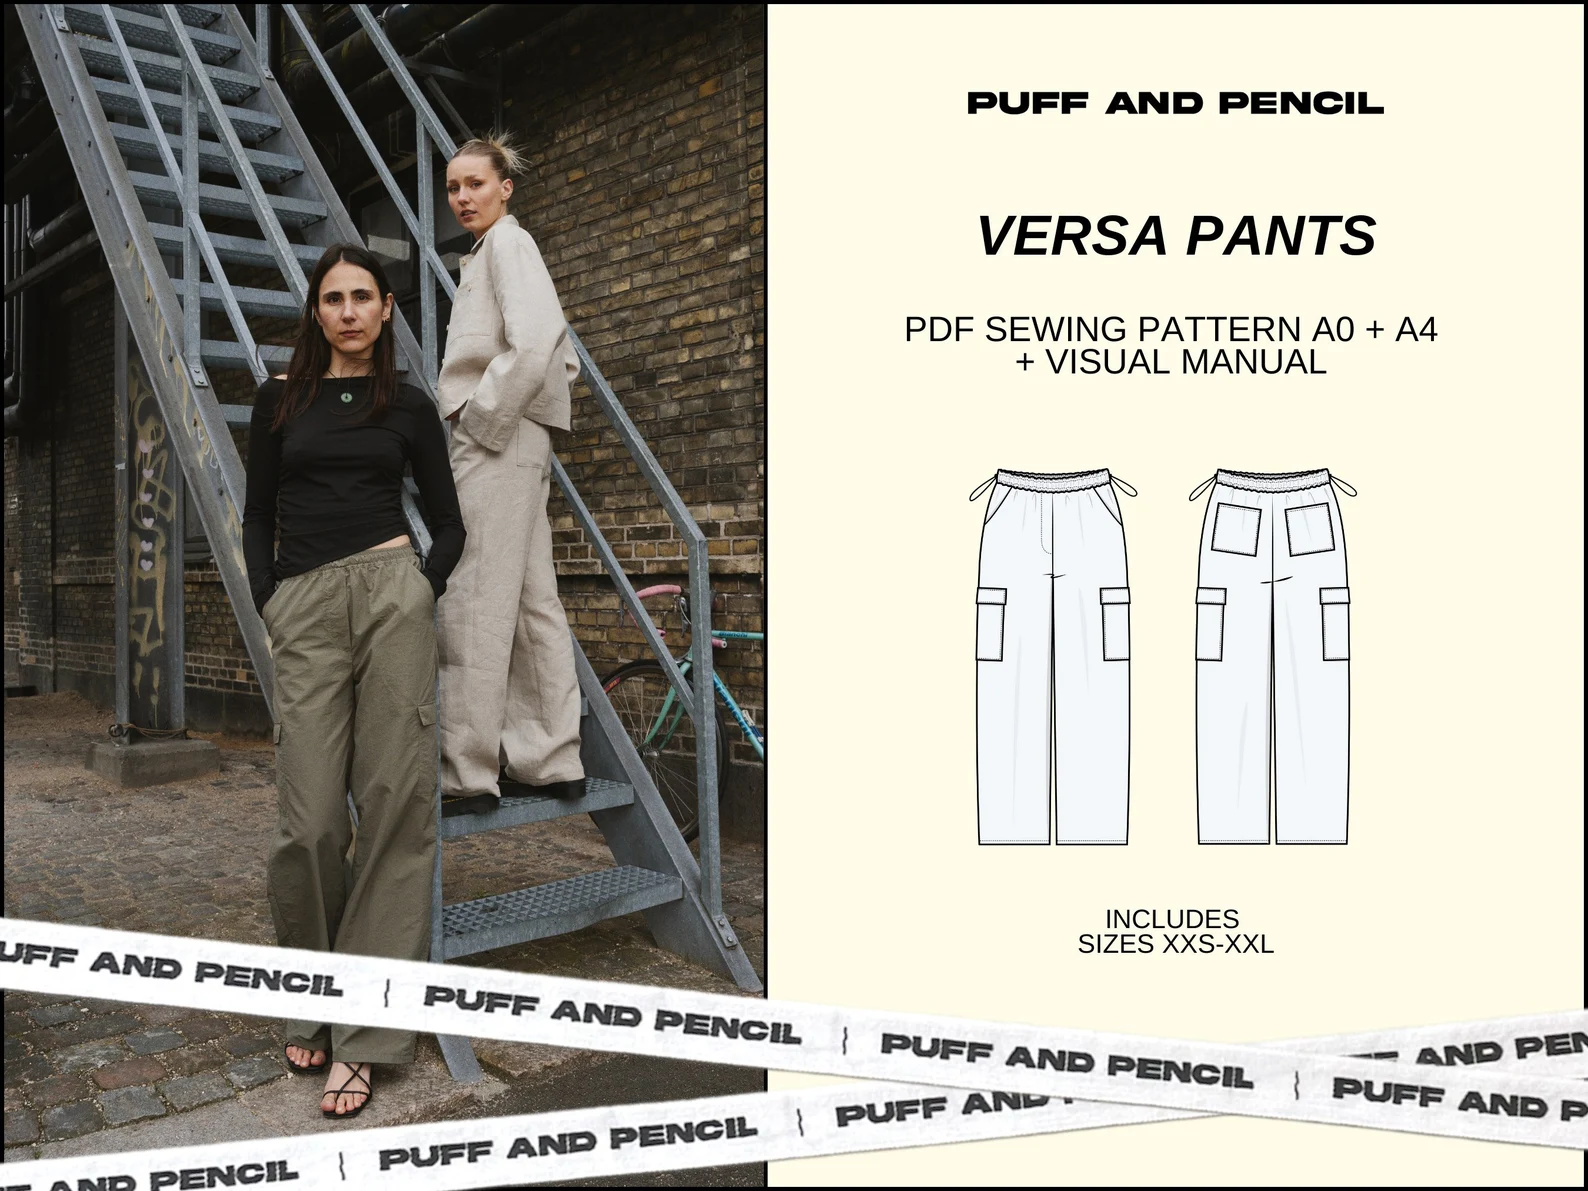 Puff and Pencil Versa Pants - The Fold Line